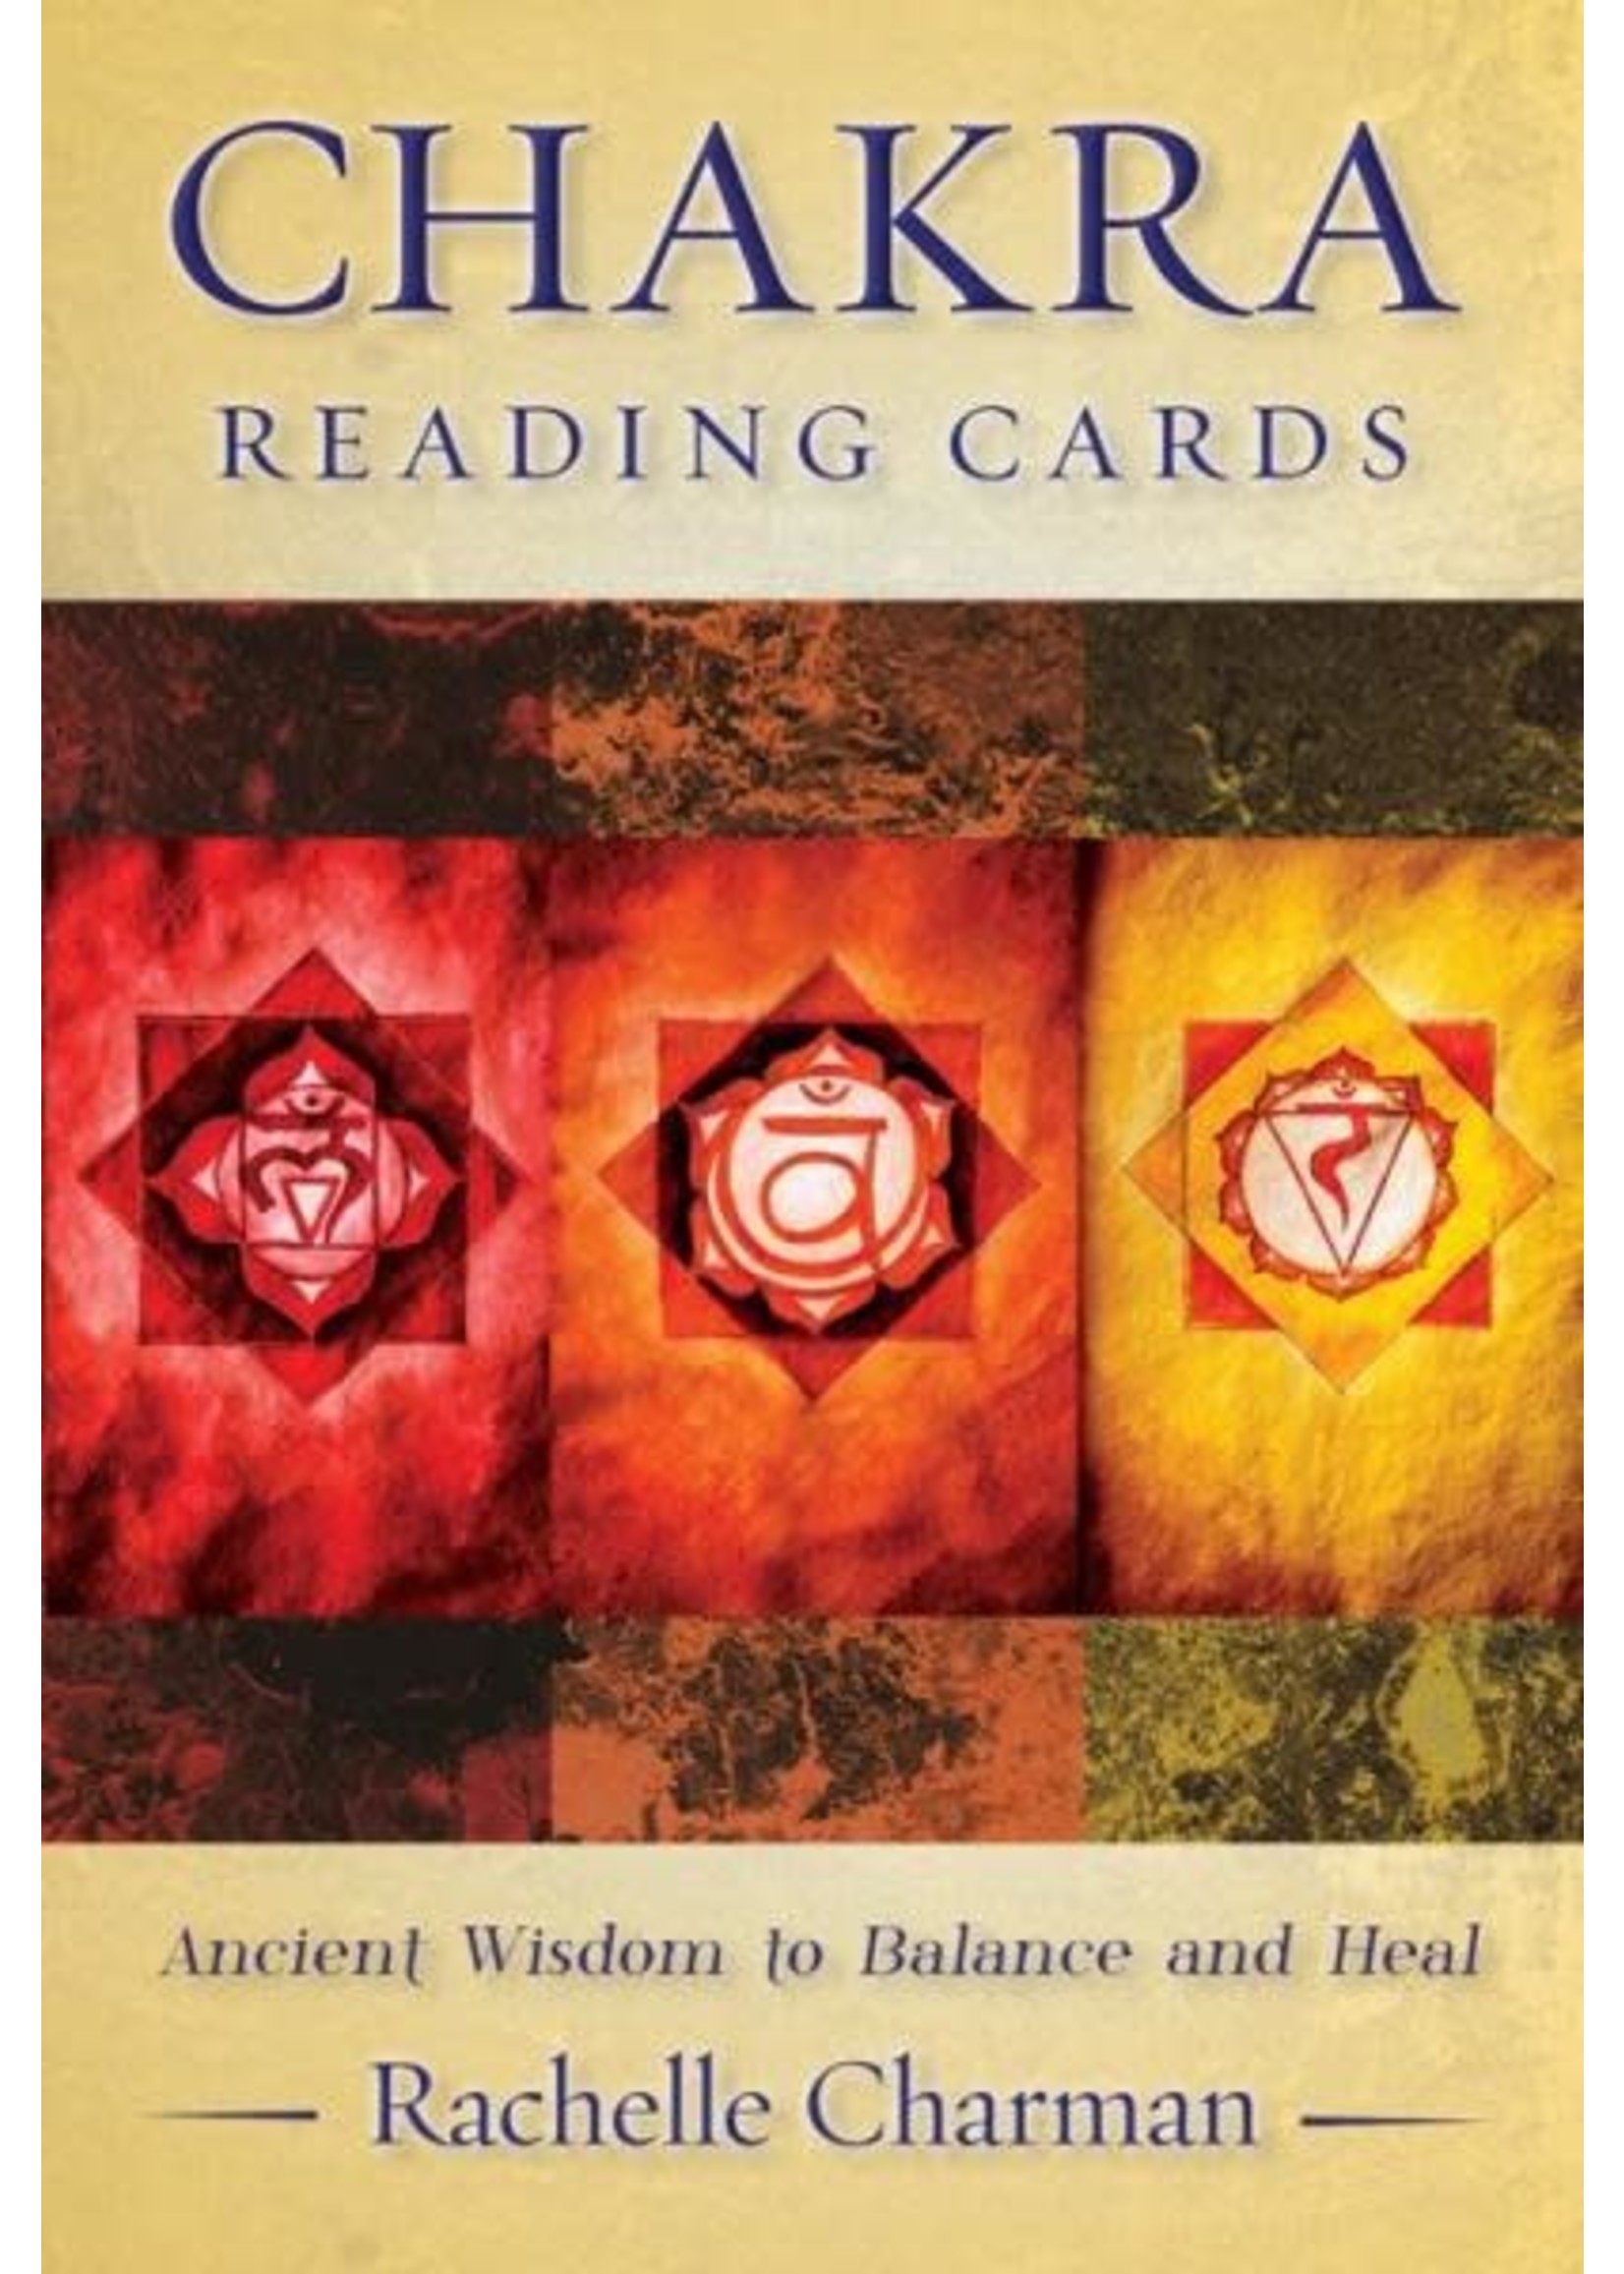 Deck Chakra Reading Cards: Ancient Wisdom to Balance and Heal